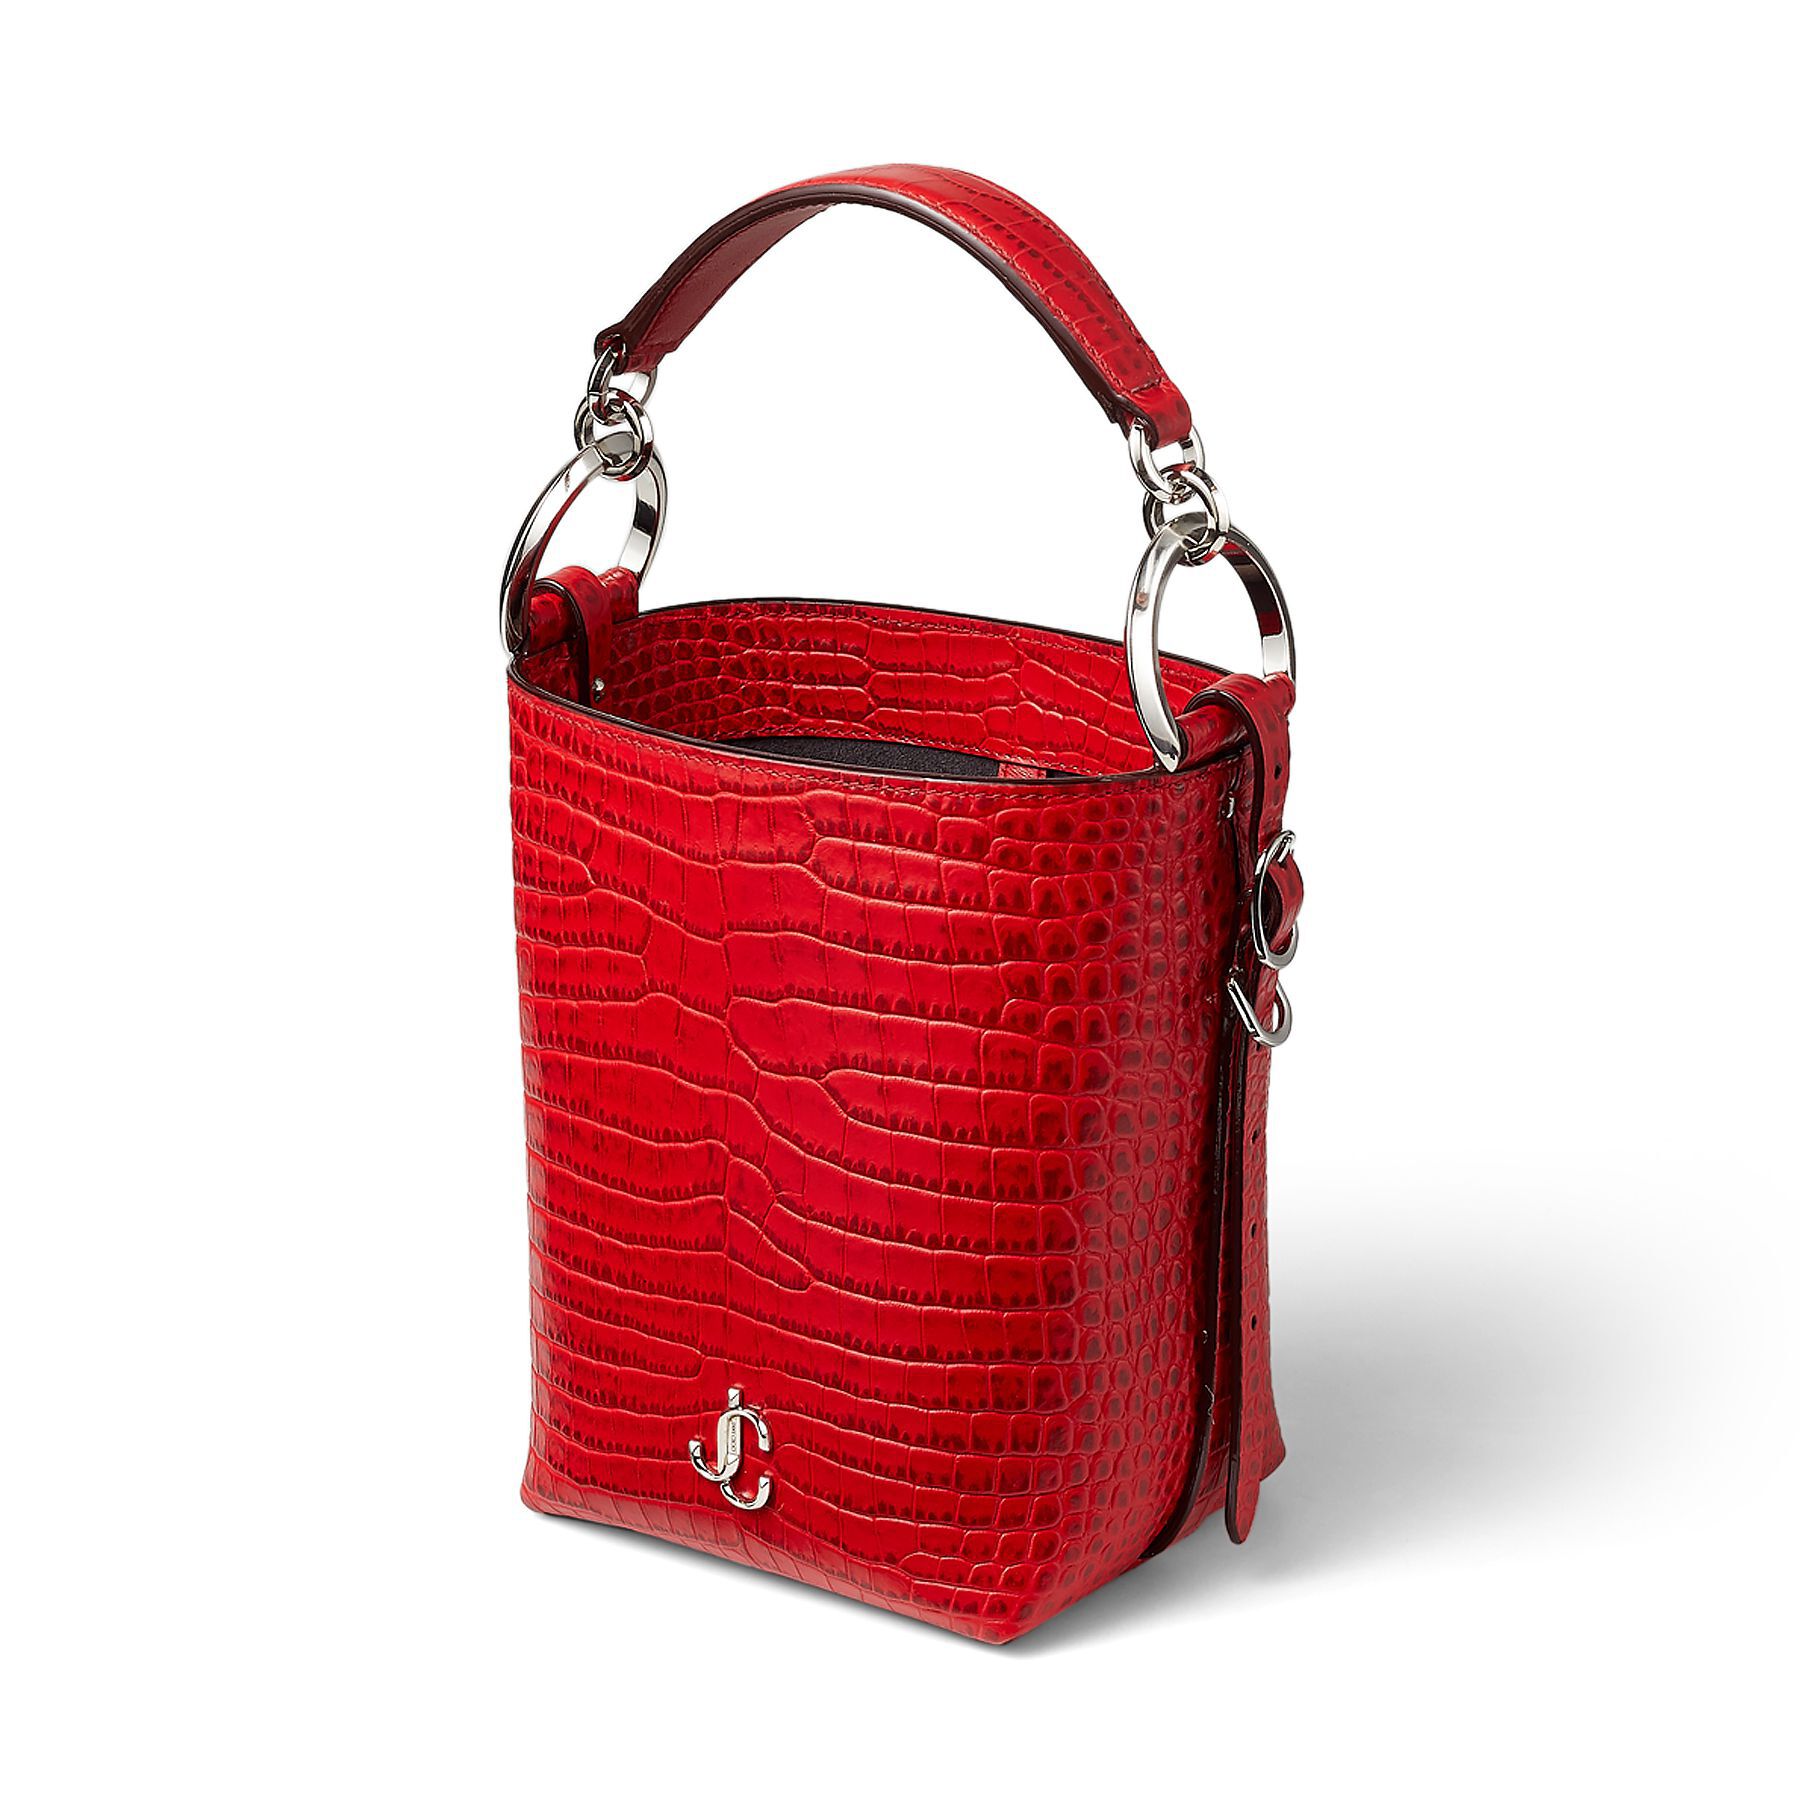 Royal Red Croc Embossed Leather Clutch Bag with Silver JC logo | VARENNE BUCKET/S| Autumn-Winter 